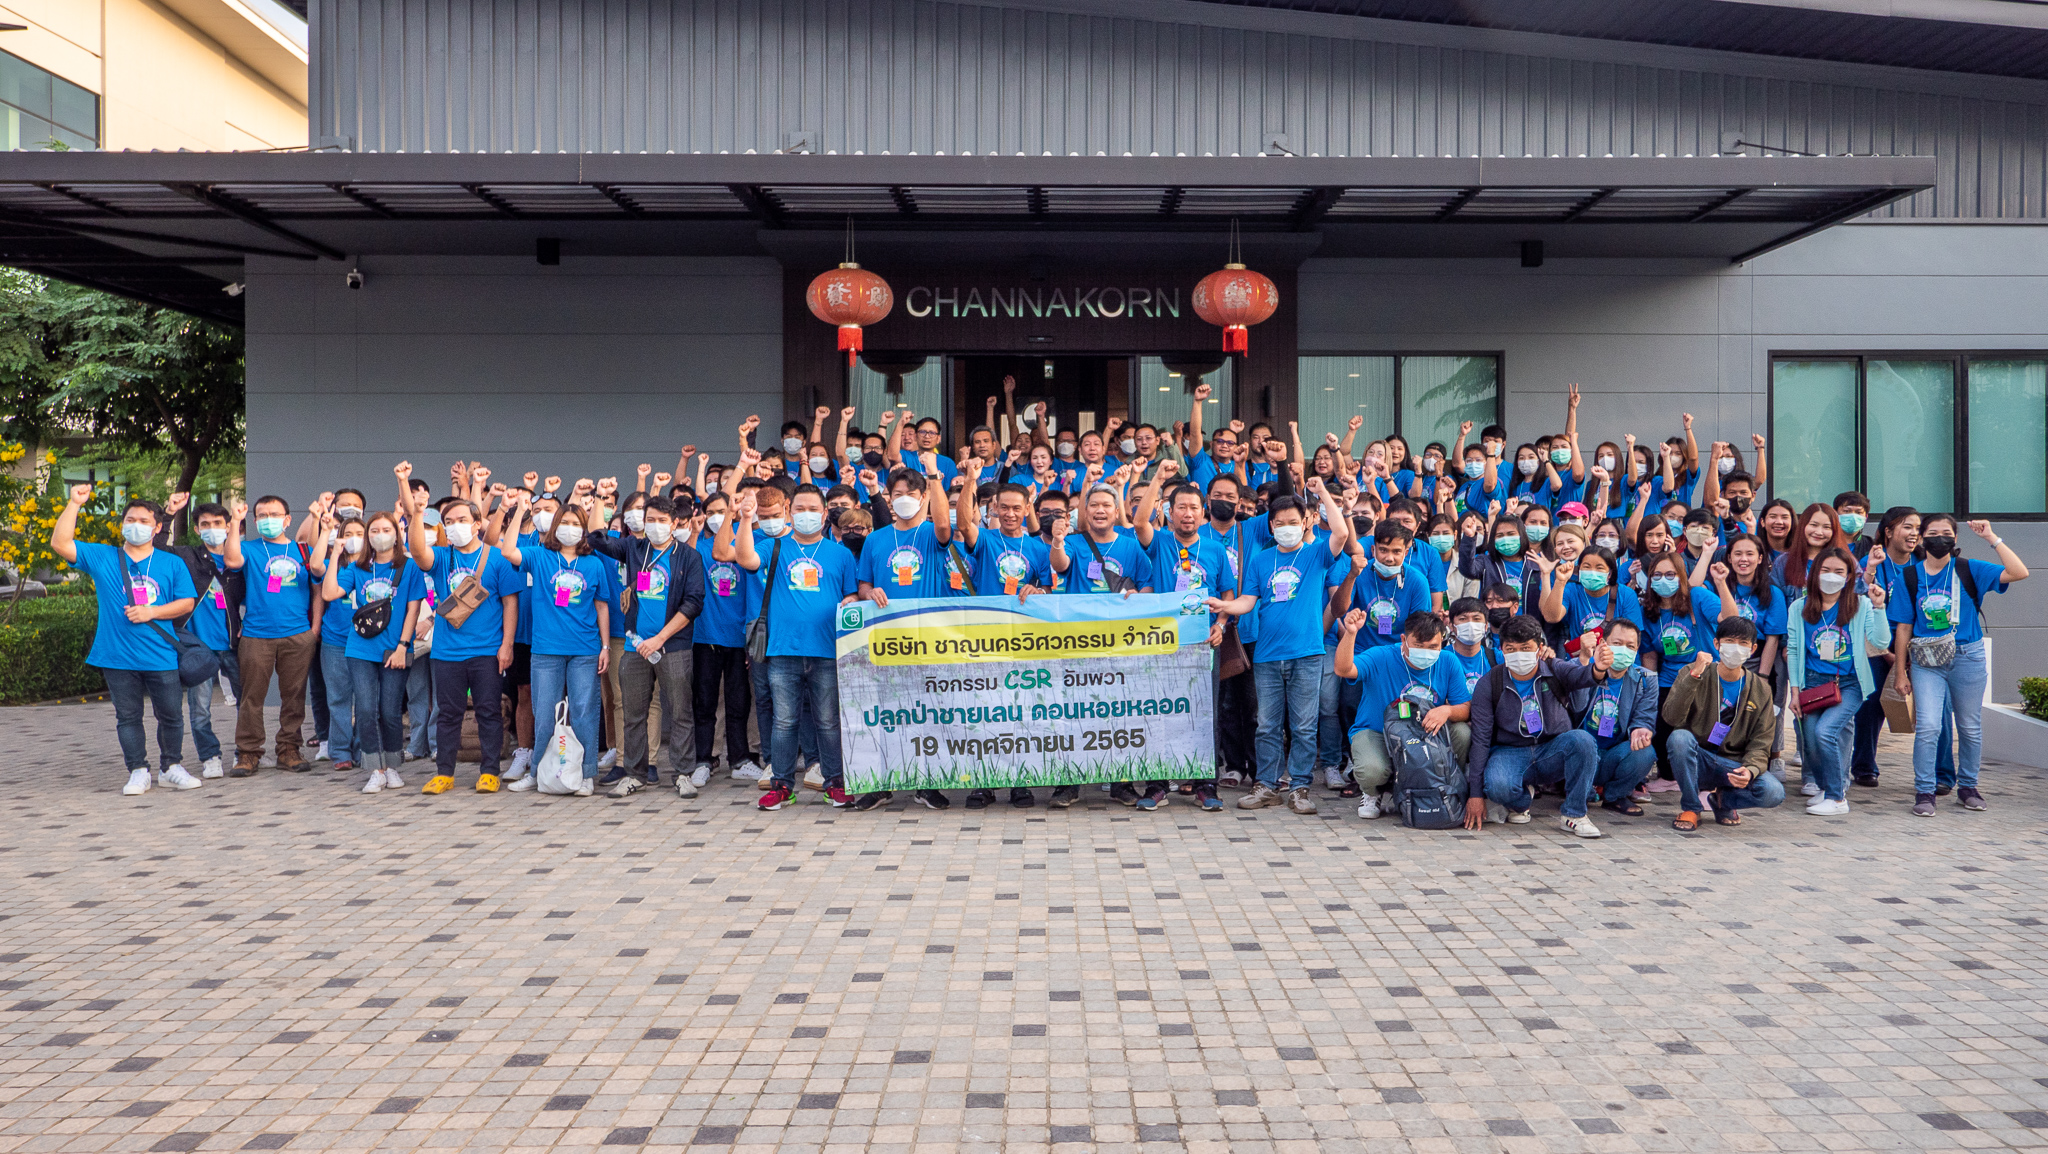 Channakorn Engineering Company Limited The management team together with the company's employees Participating in CSR activities, planting forests of mangroves and Samae trees. - Channakorn Engineering Co.,Ltd.